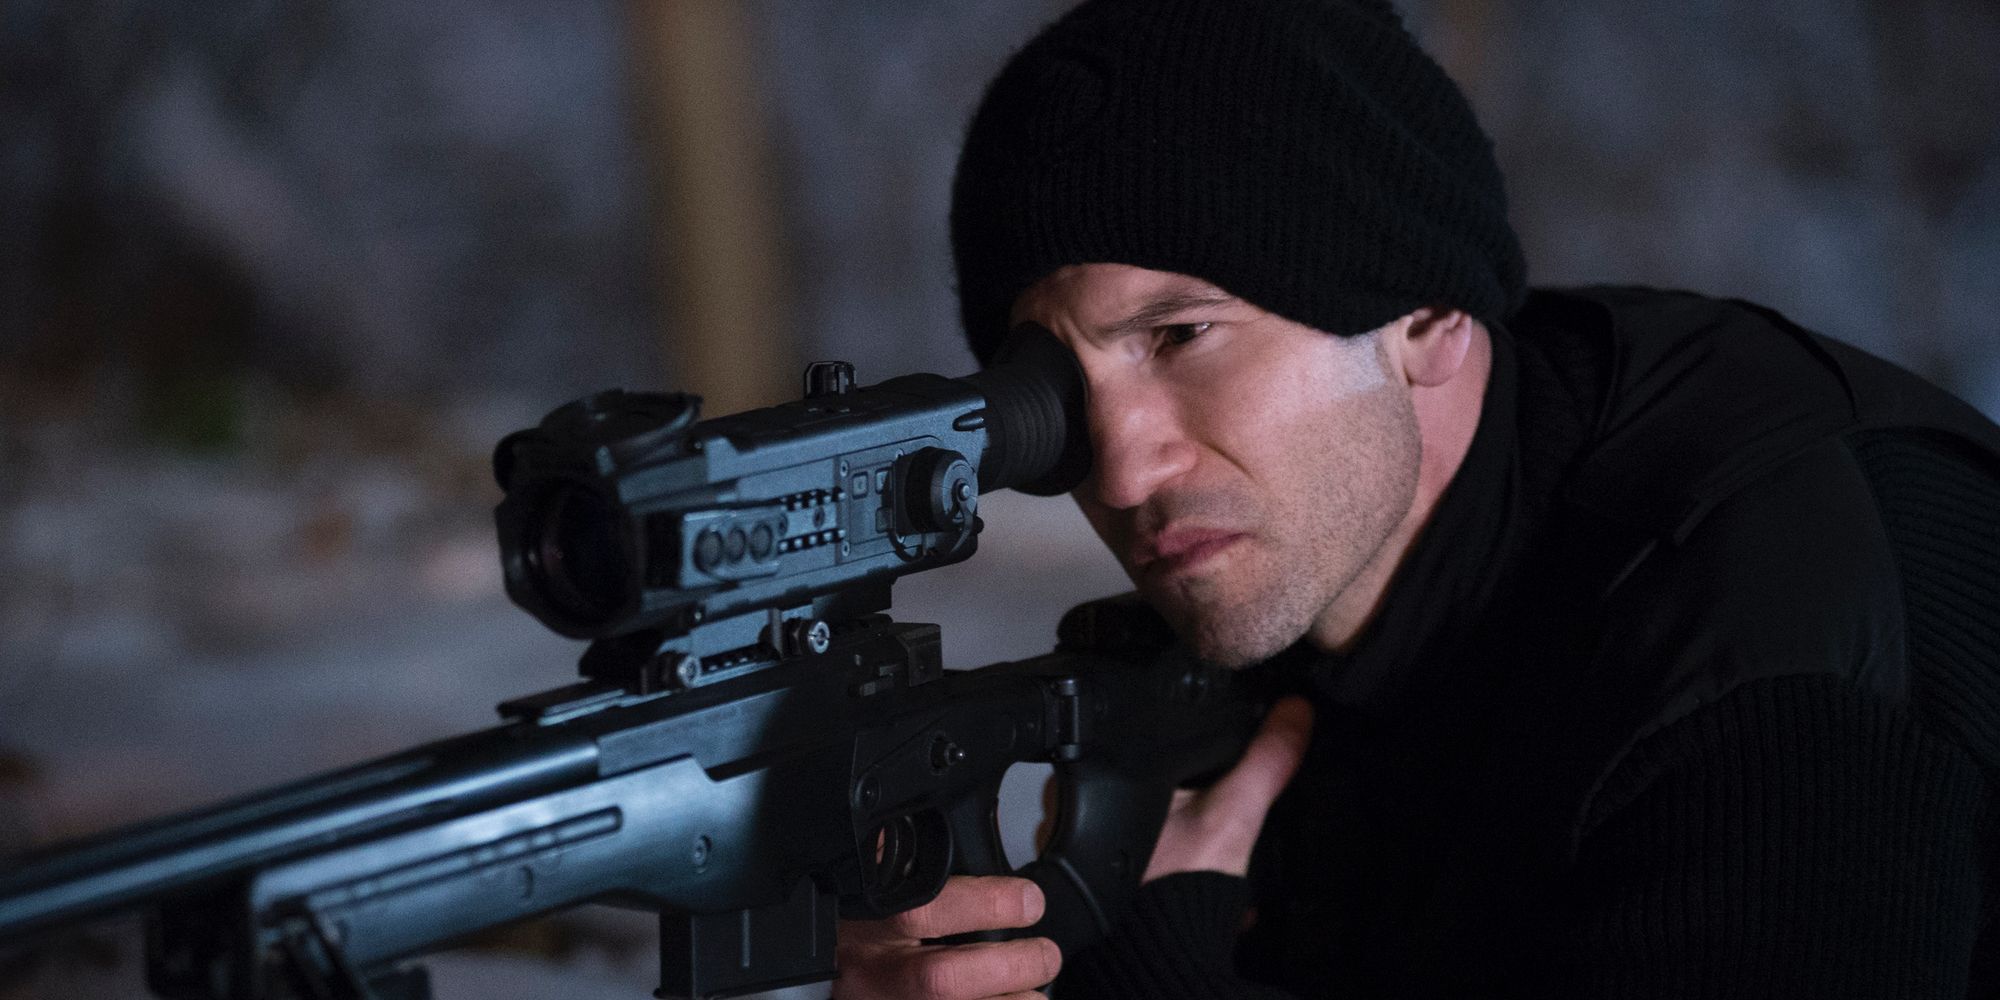 Marvel’s The Punisher Season 1 Finale Reaches a Bloody Conclusion